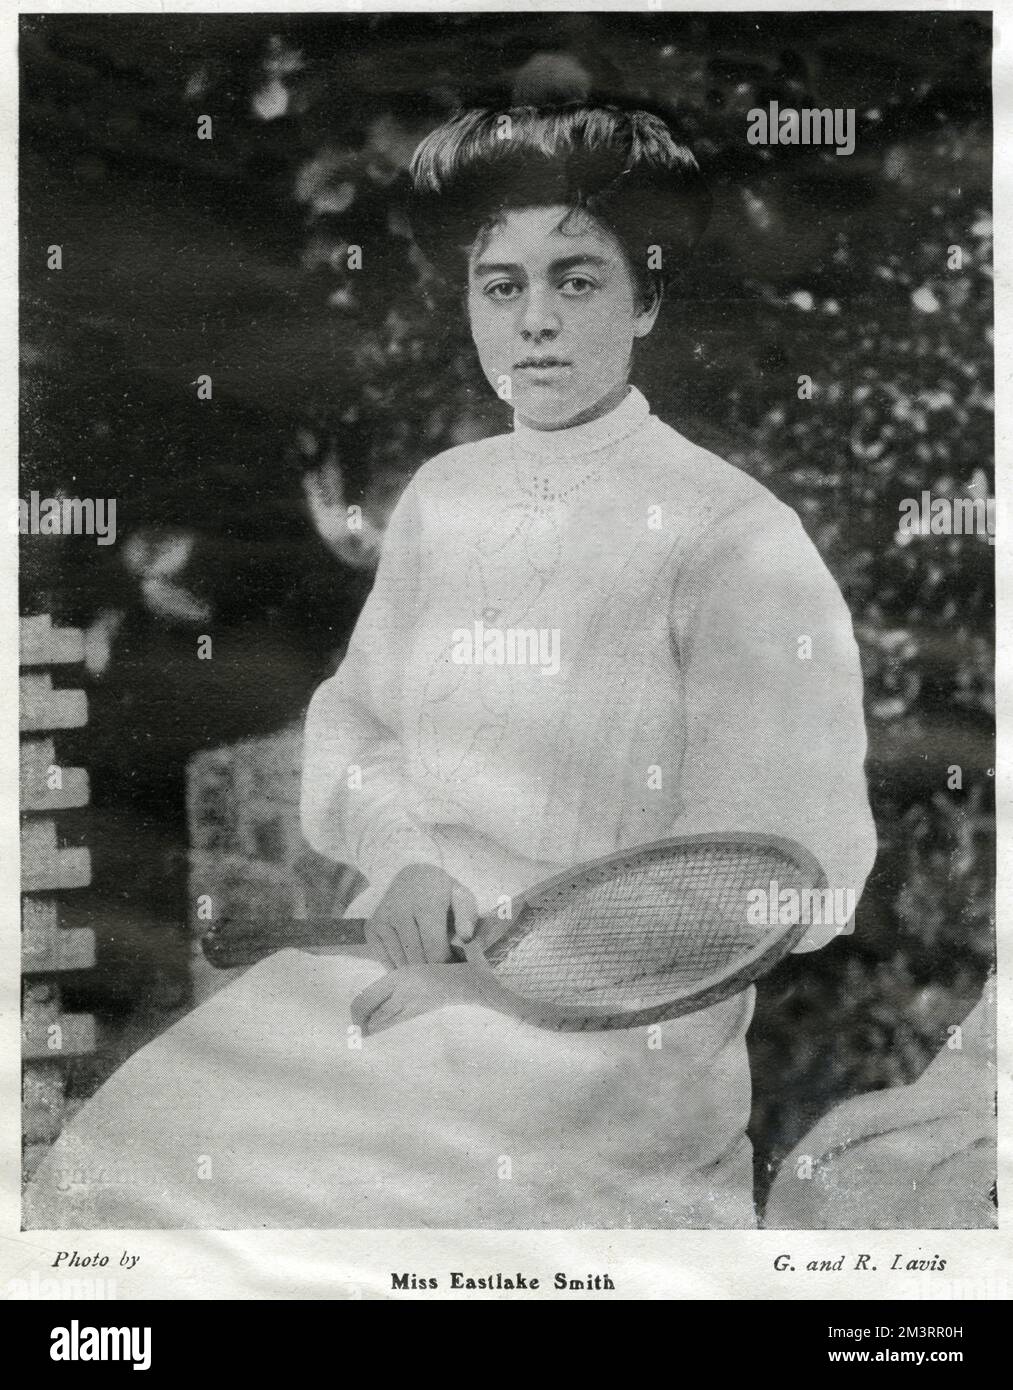 Gwendoline Eastlake-Smith (1883 - 1941), British tennis player, winning an Olympic gold medal at the 1908 Summer Olympics in London.     Date: 1905 Stock Photo